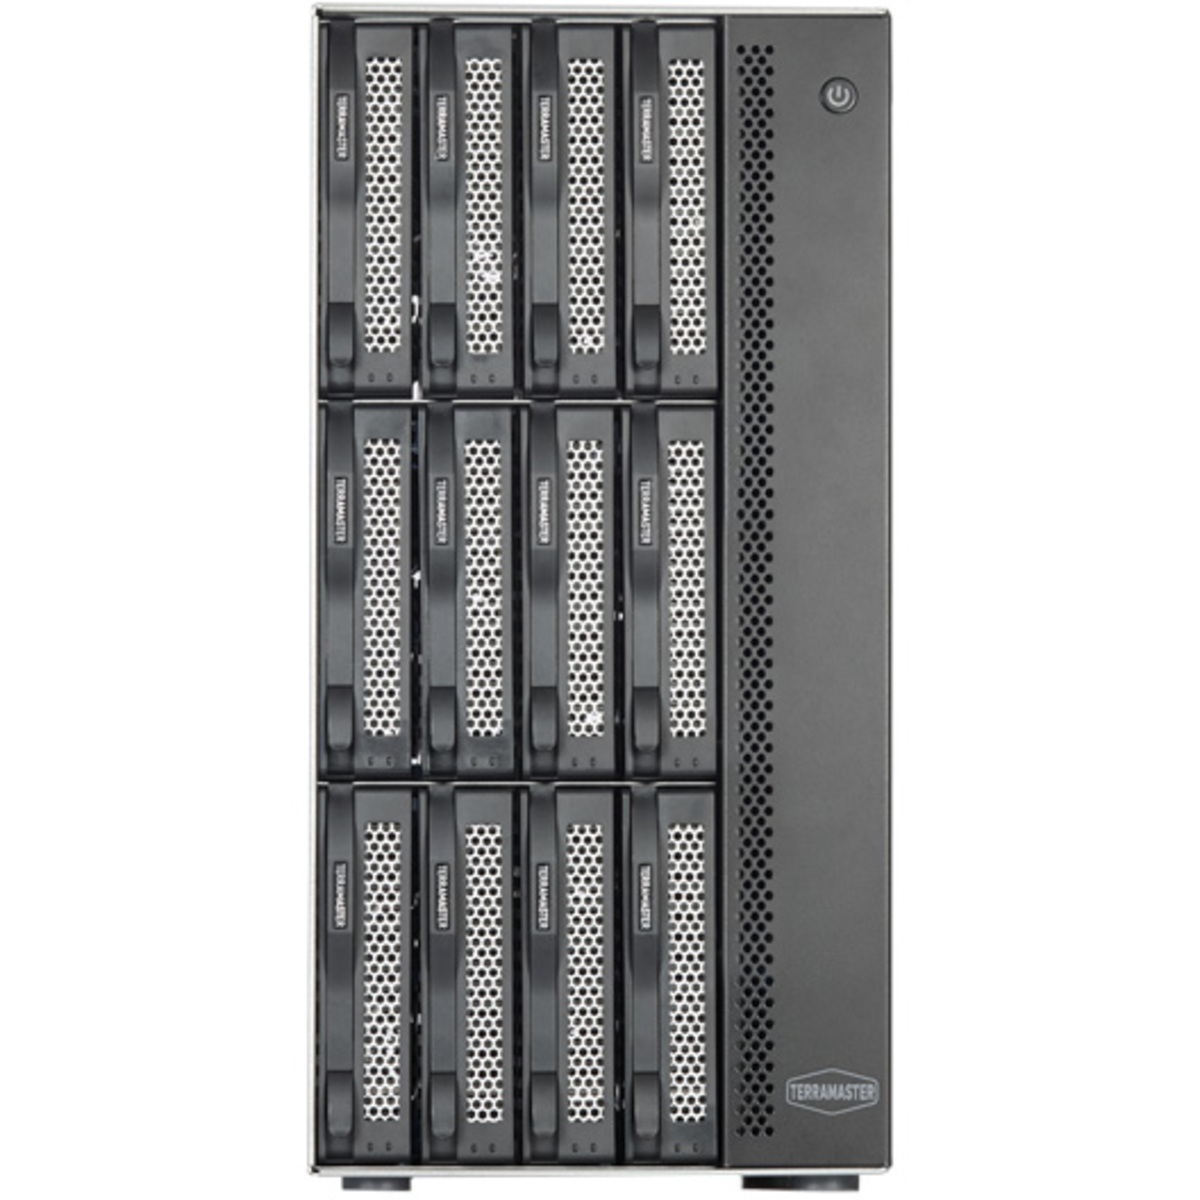 TerraMaster T12-450 70tb 12-Bay Desktop Multimedia / Power User / Business NAS - Network Attached Storage Device 7x10tb Seagate IronWolf Pro ST10000NT001 3.5 7200rpm SATA 6Gb/s HDD NAS Class Drives Installed - Burn-In Tested - ON SALE T12-450